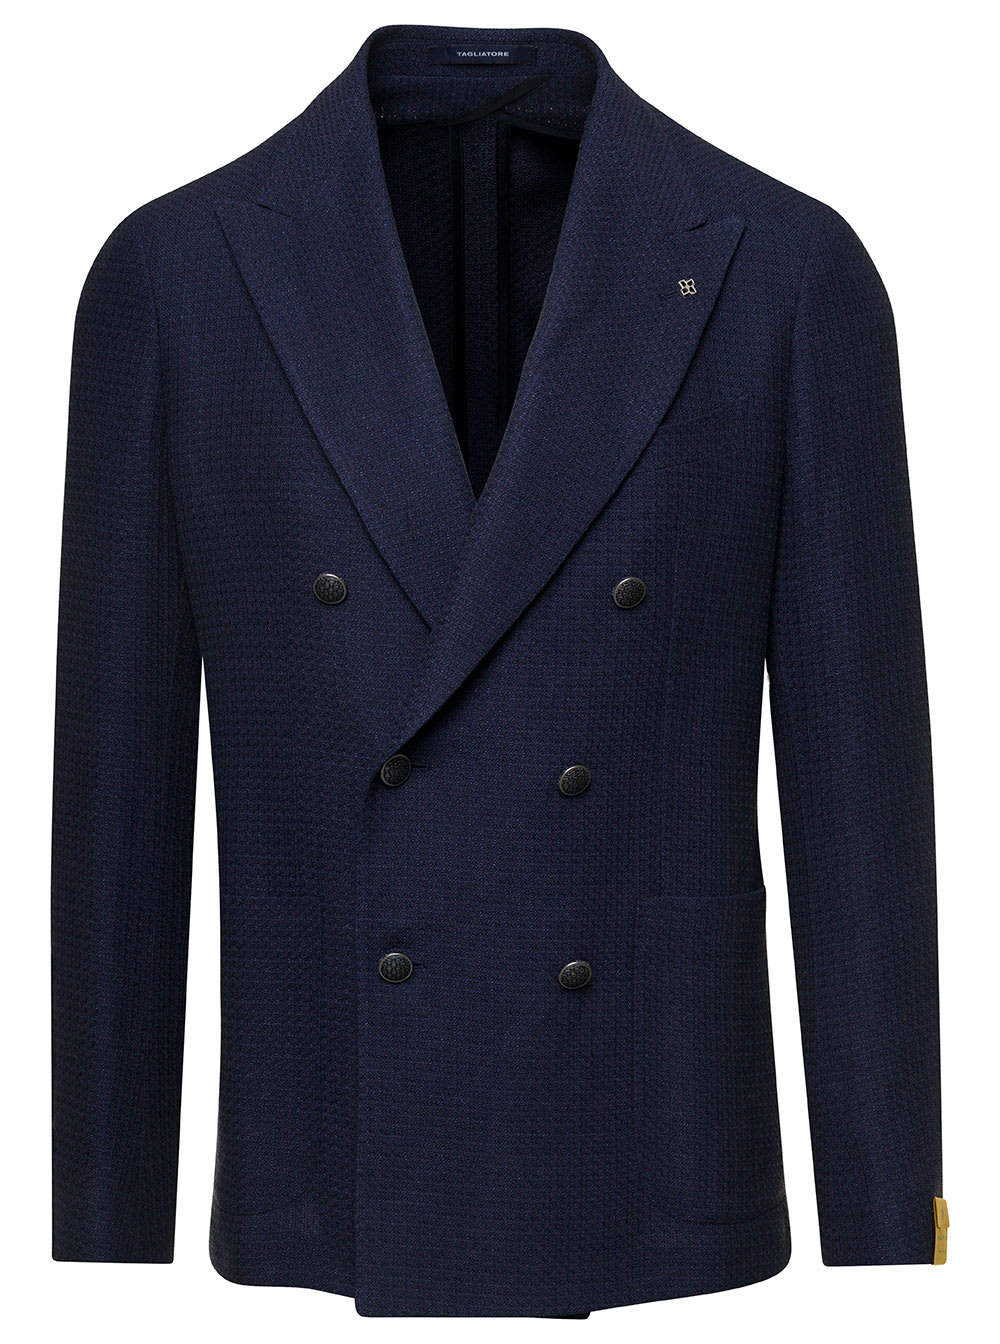 TAGLIATORE BLUE DOUBLE-BREASTED JACKET WITH LOGO CHARM IN LINEN BLEND MAN